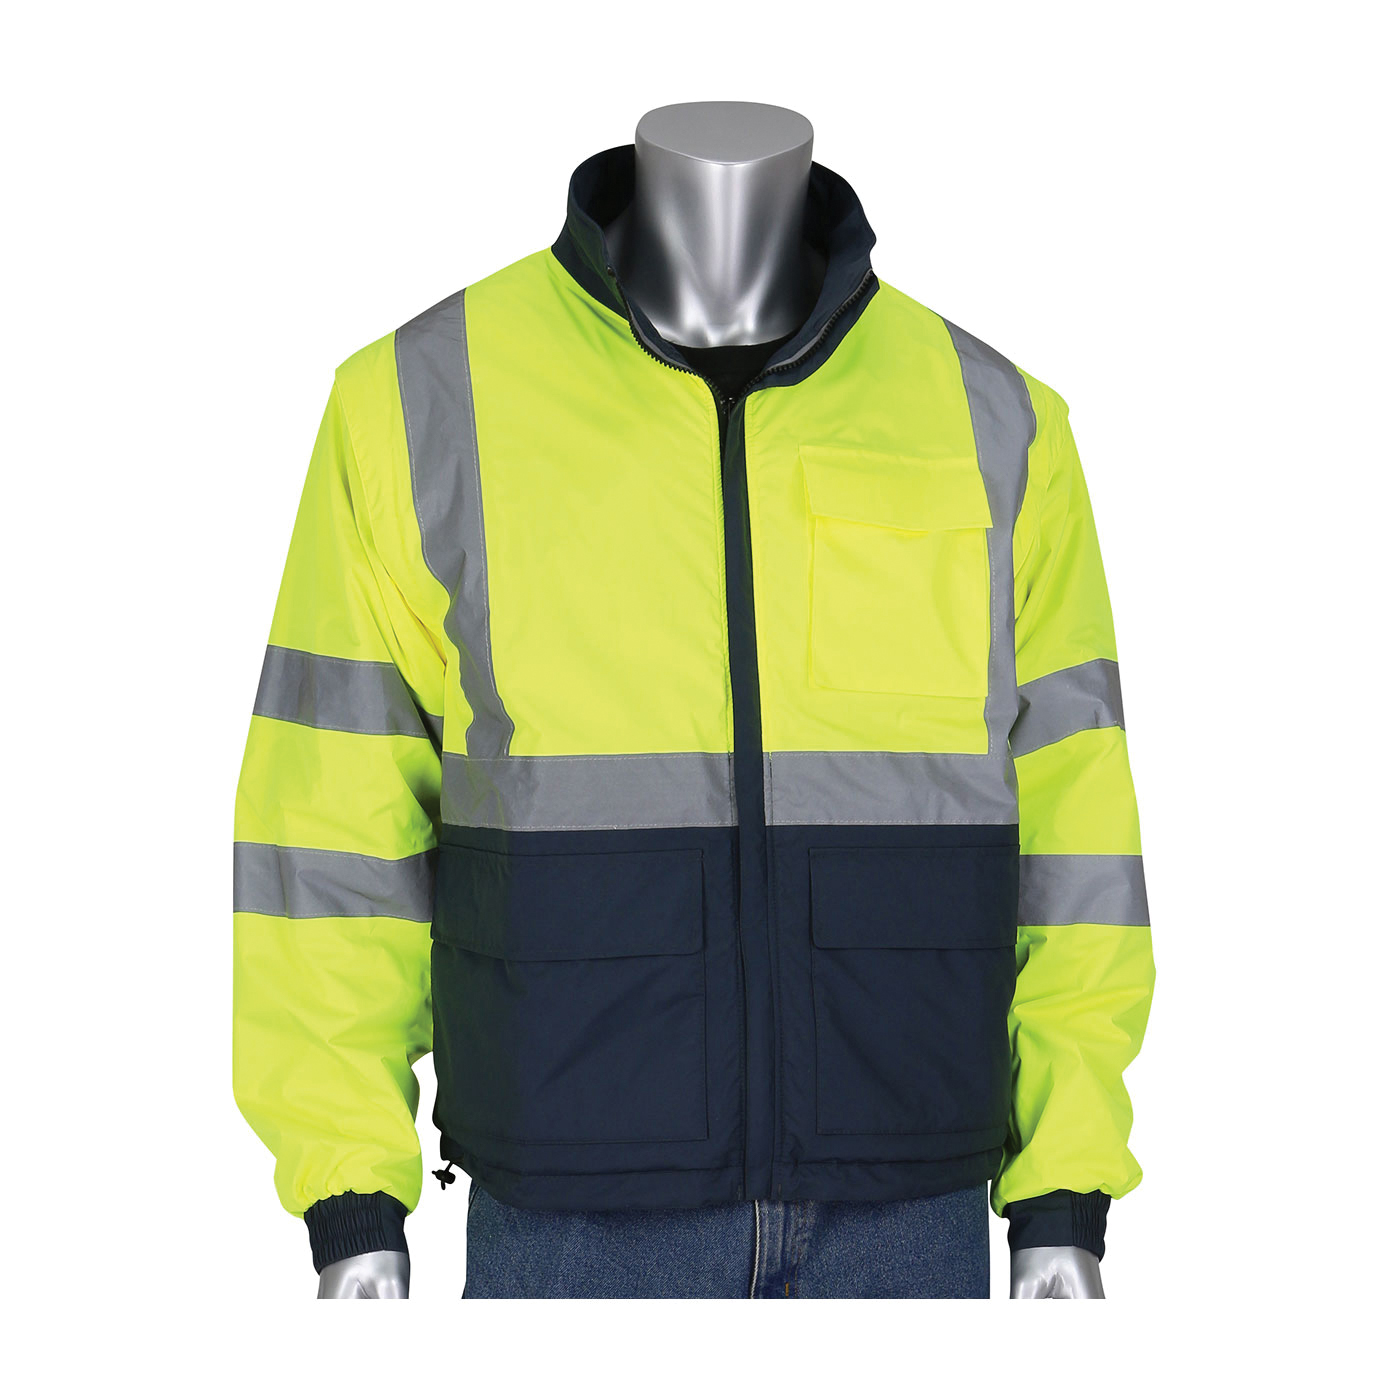 PIP® 333-1500-R/4X 333-1500-R 4-in-1 Multi-Seasonal Lightweight Reversible Windbreaker Jacket With Detachable Sleeves, Dark Gray/Hi-Viz Lime Yellow, Polyester, 60.6 in Chest, Resists: Water, ANSI 107 Type R Class 3